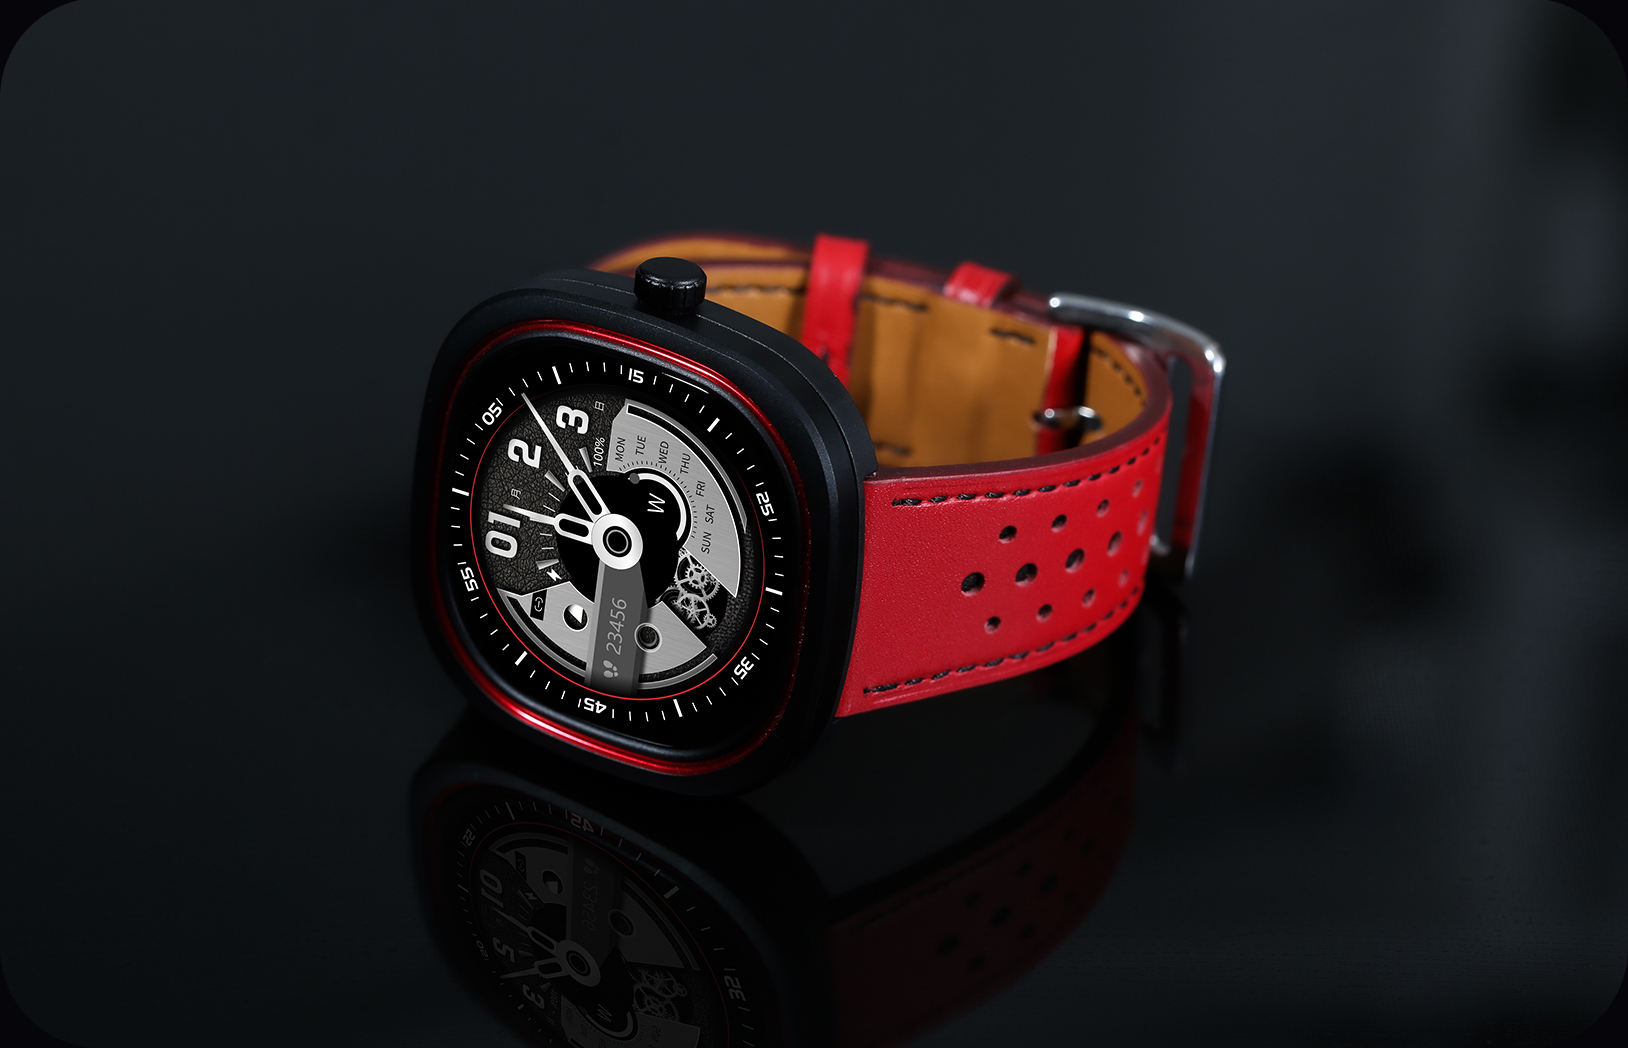  Doogee DG Ares Colors | Black frame with red leather strap | Doogee